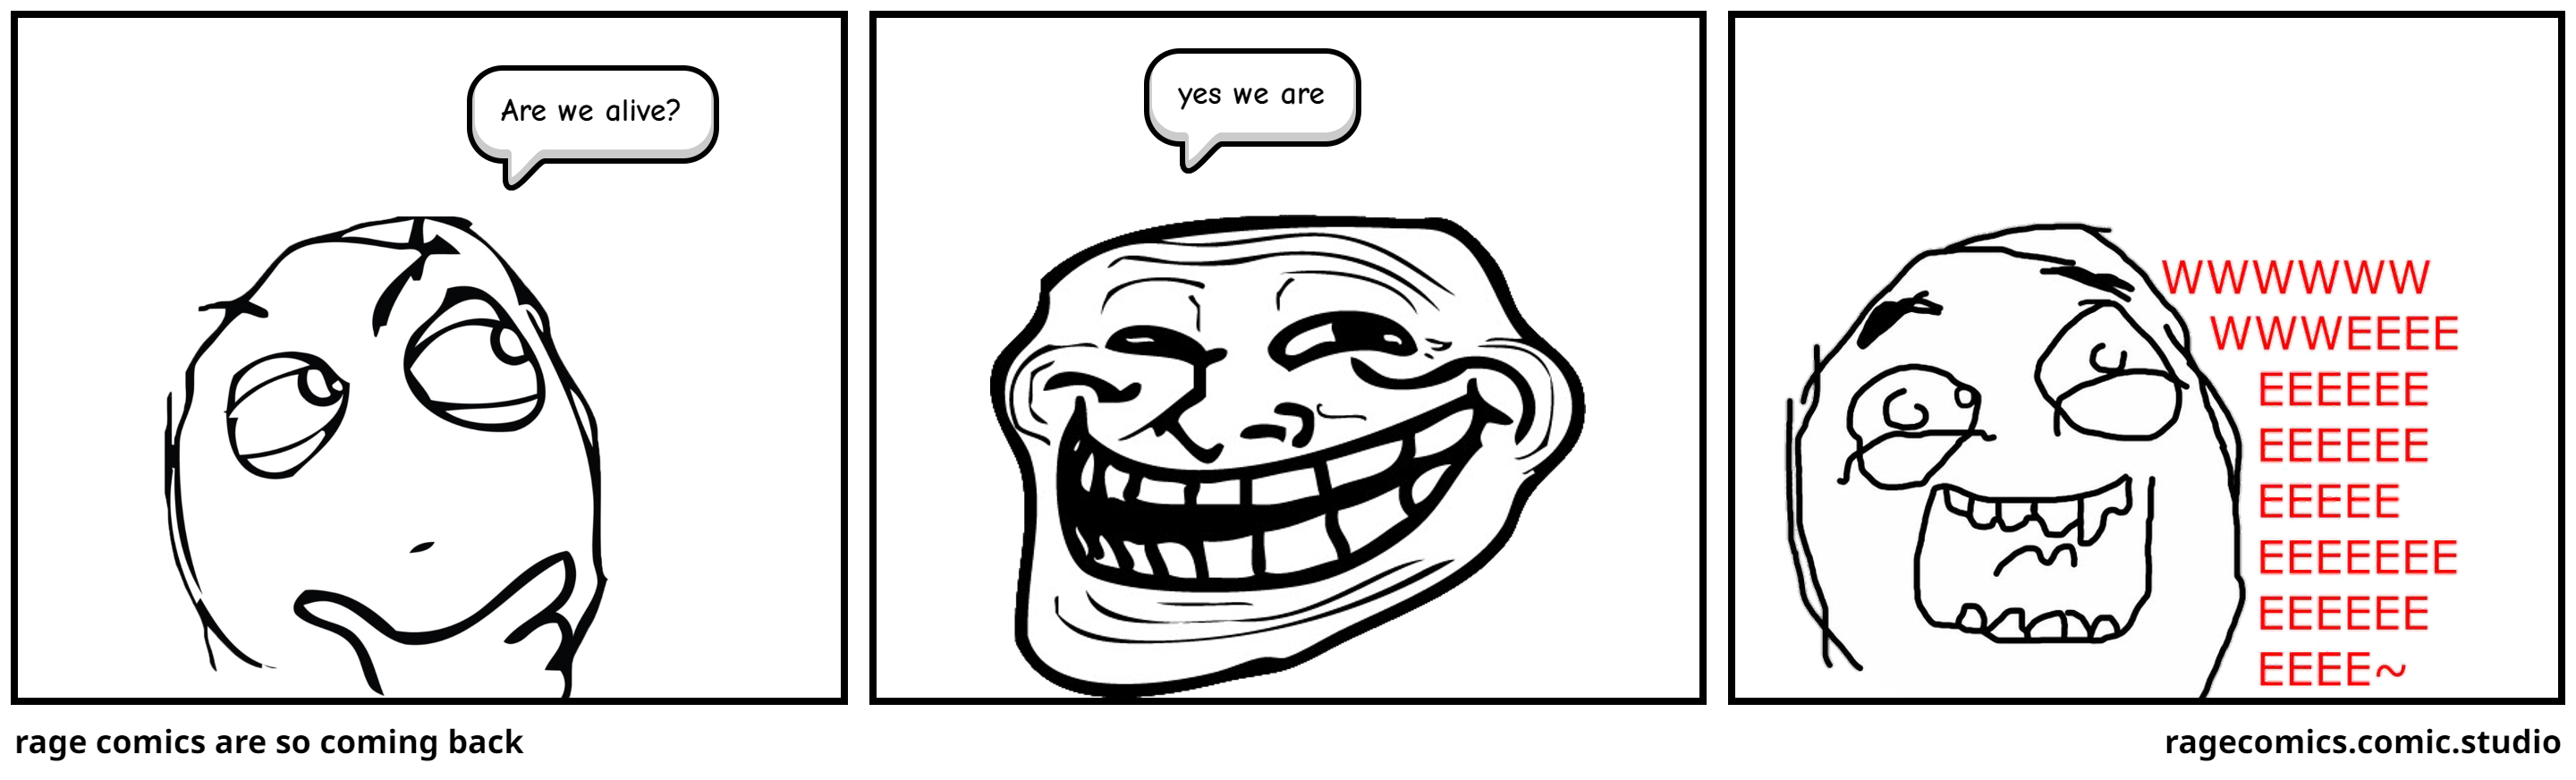 rage comics are so coming back